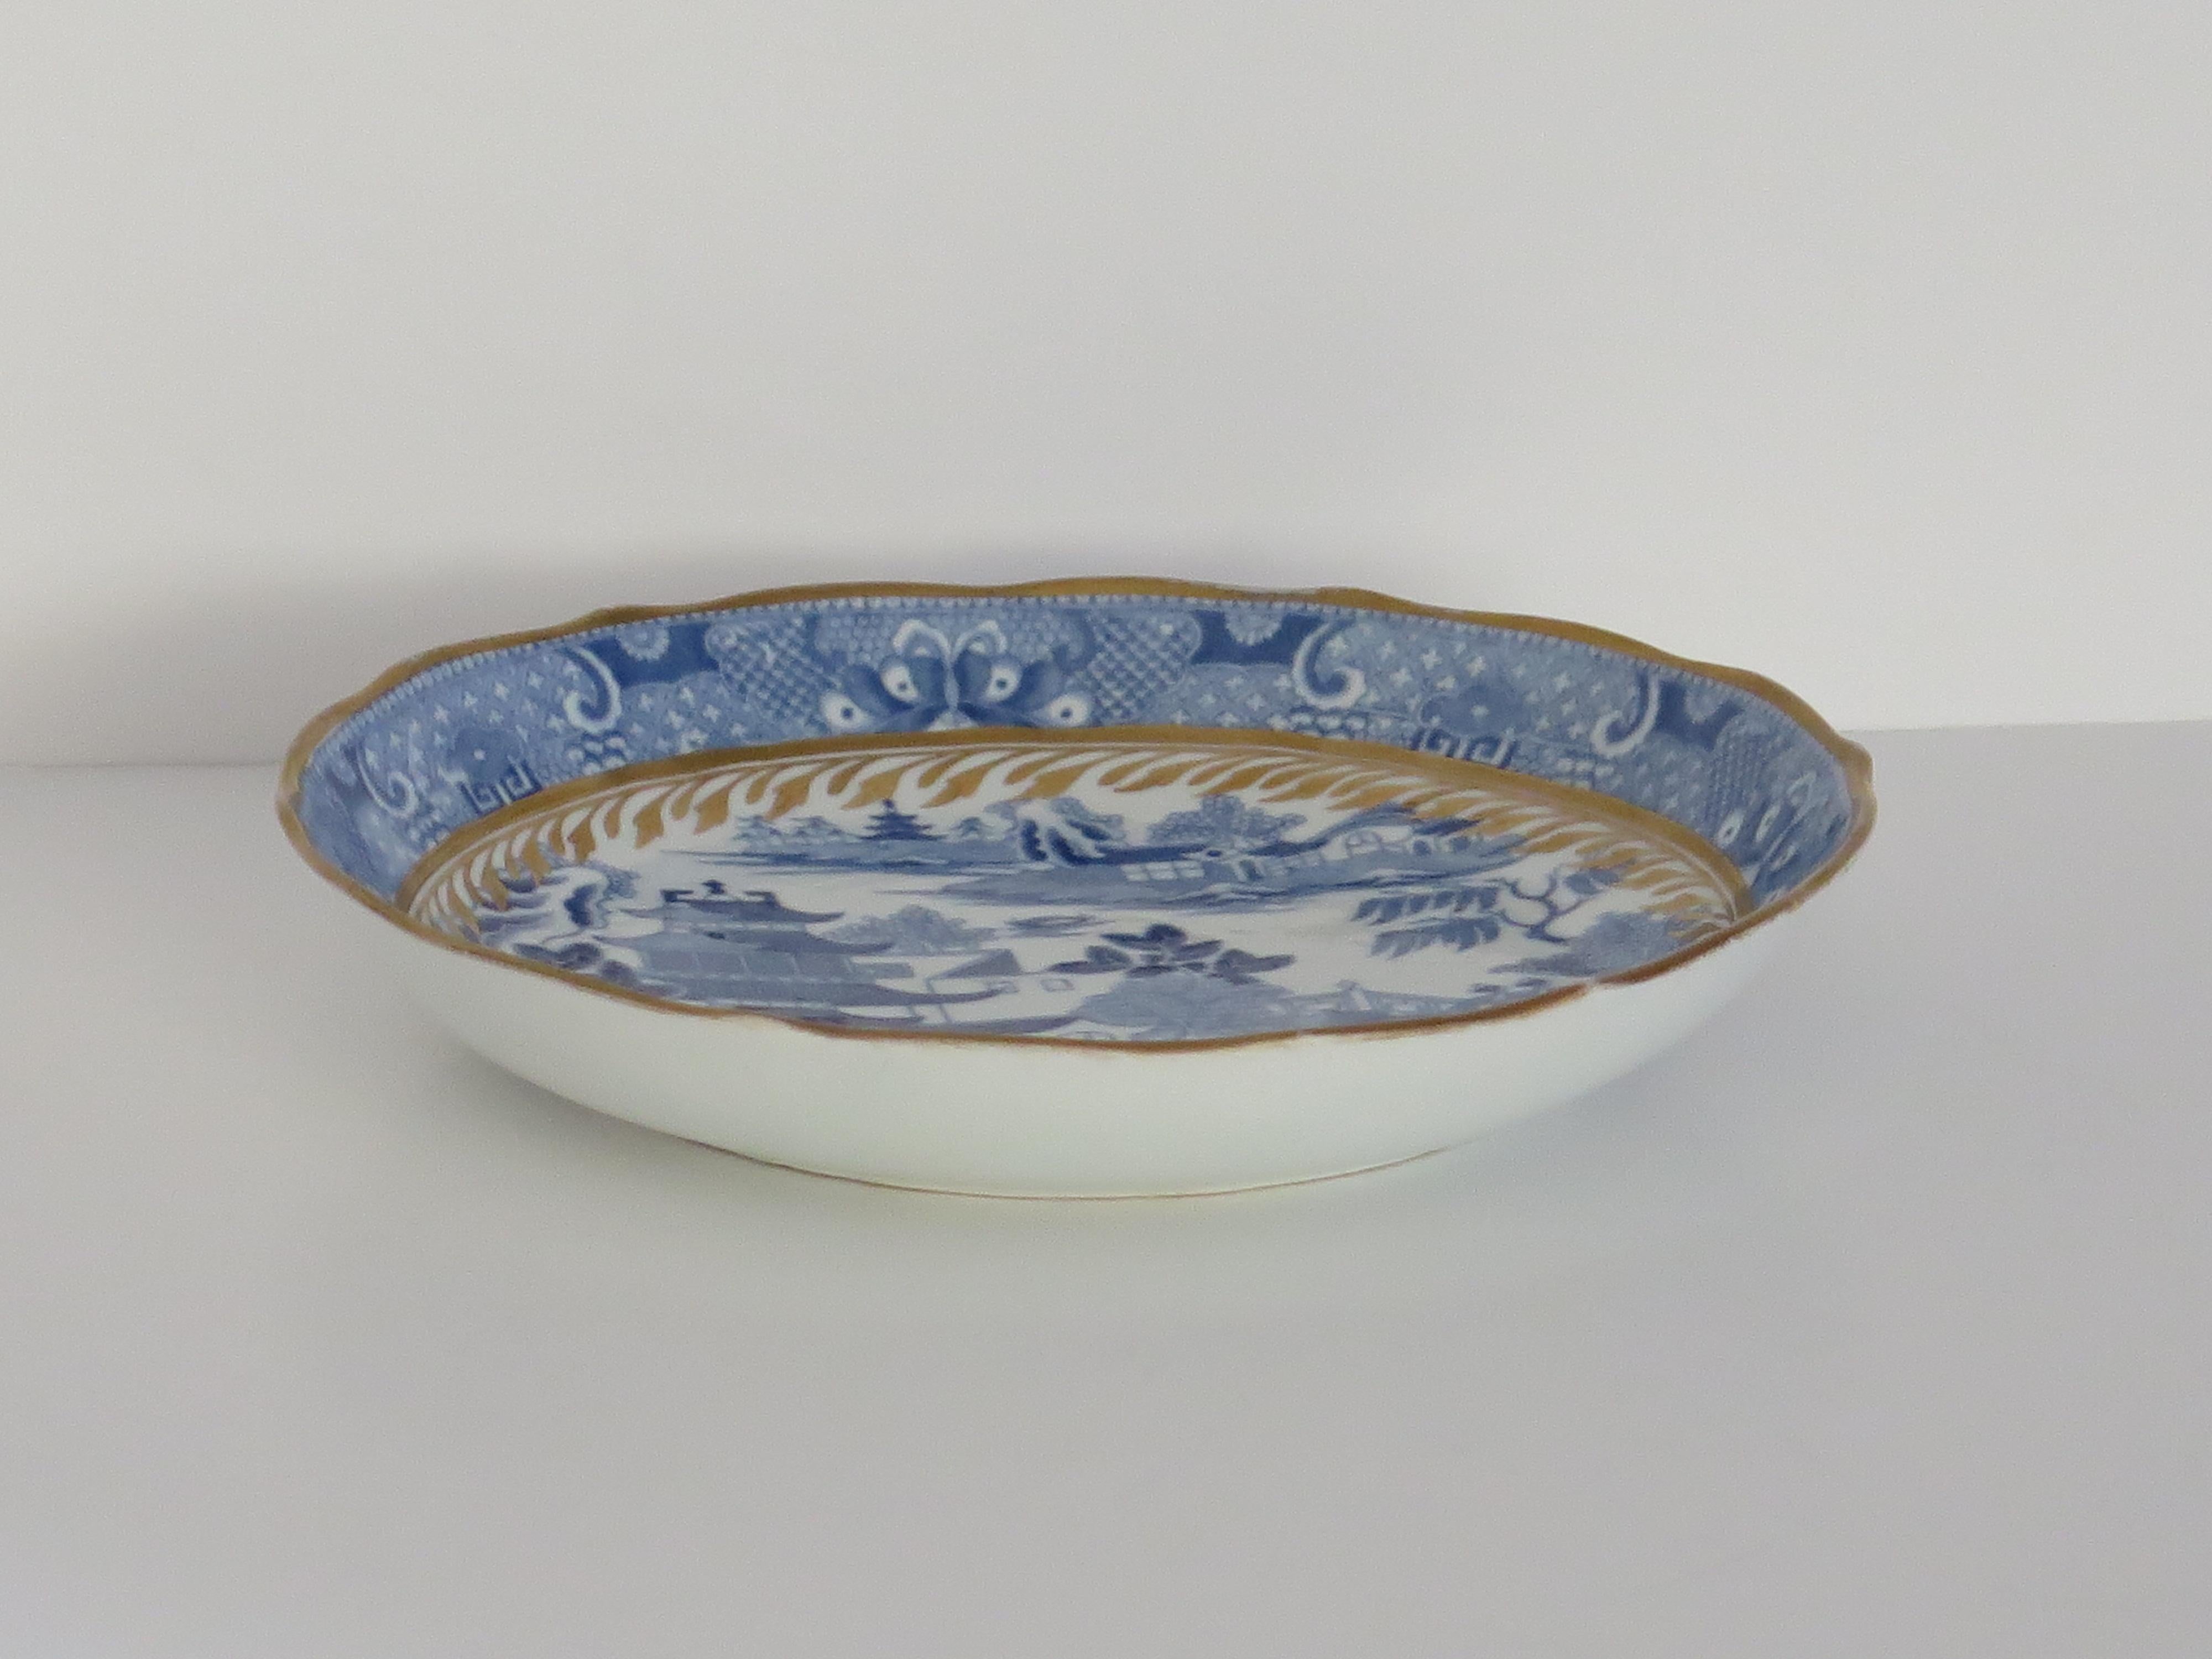 Chinoiserie Miles Mason Porcelain Saucer Dish Blue and White Gilded Broseley Pattern Ca 1805 For Sale